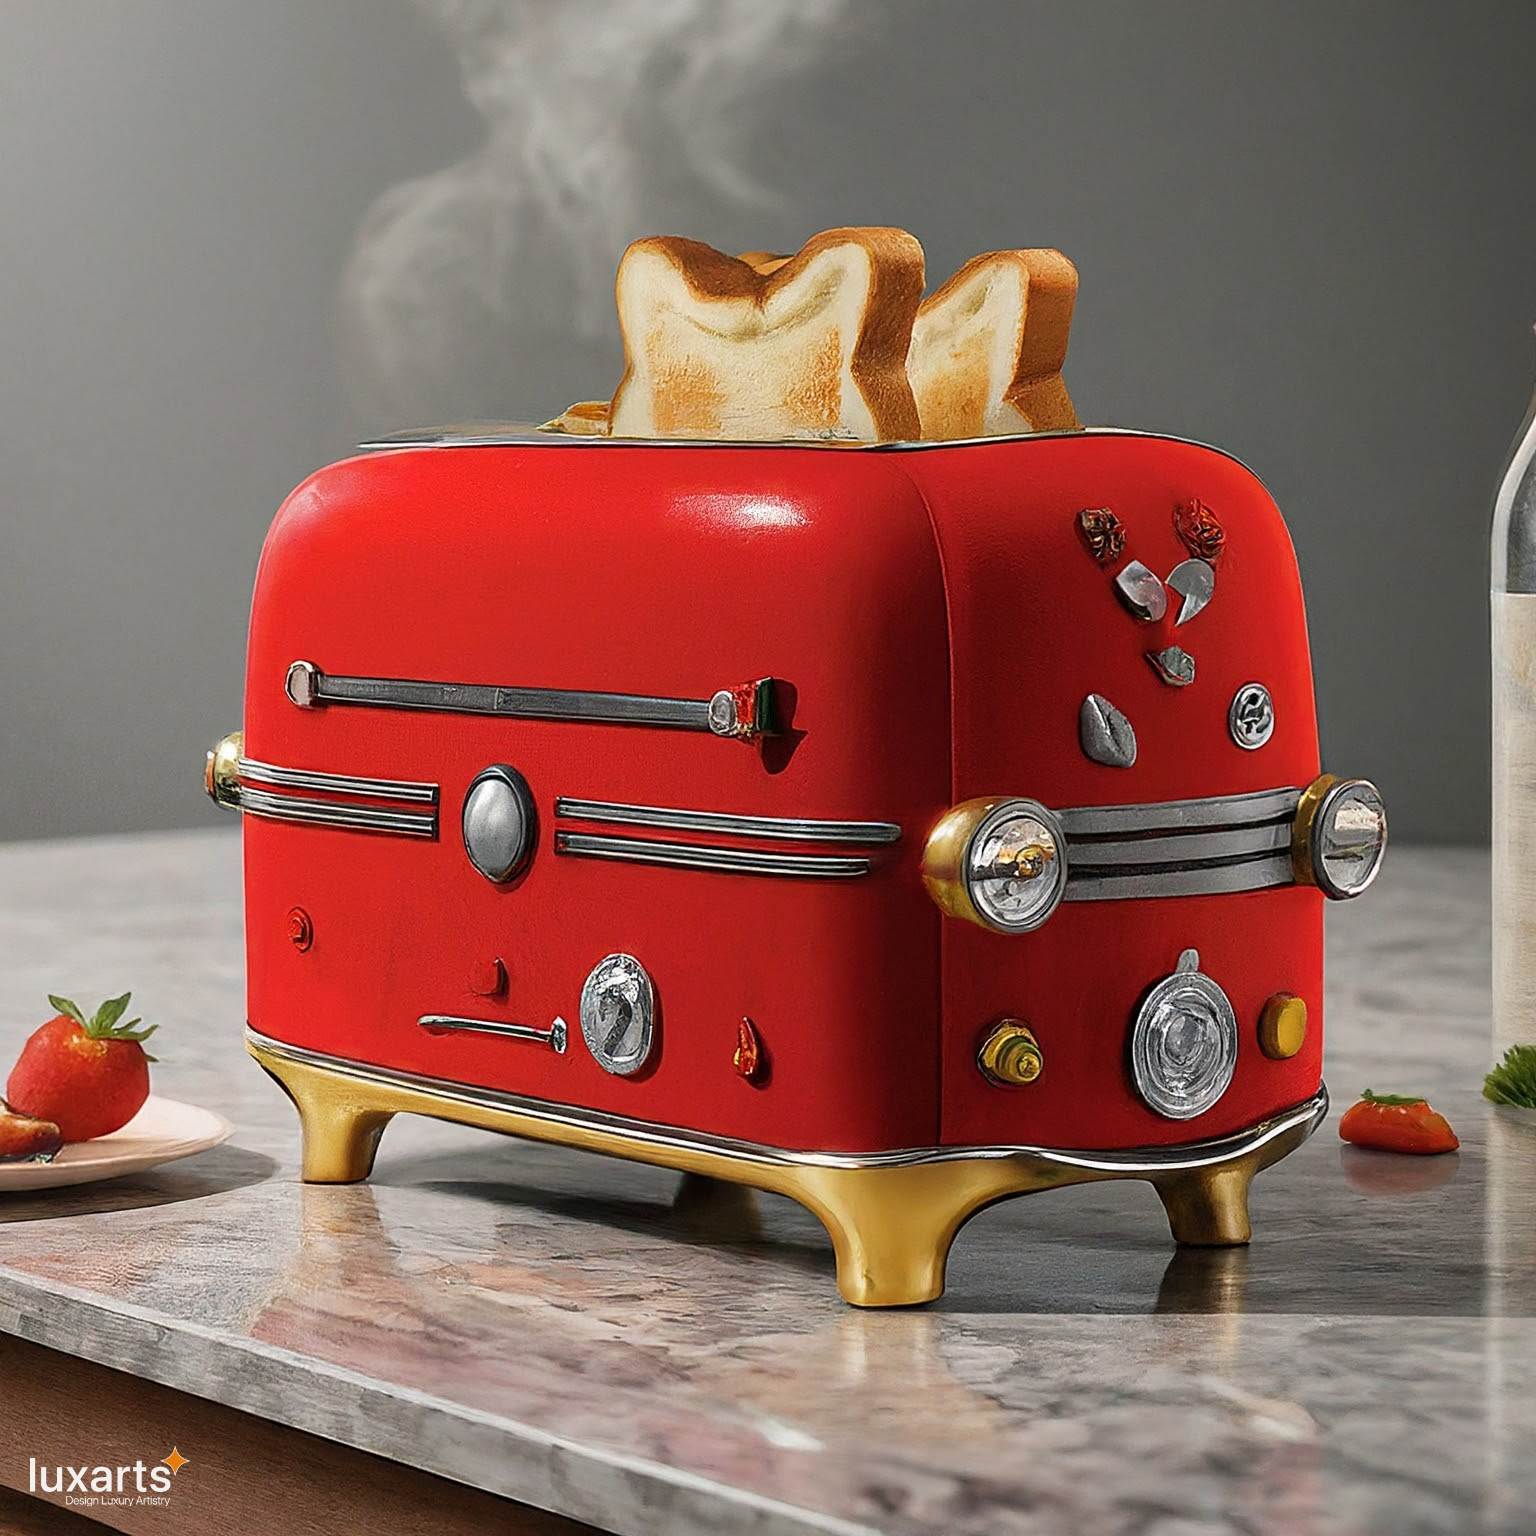 Fire Truck Shaped Toaster: Adding Fun to Your Kitchen luxarts fire truck toaster 3